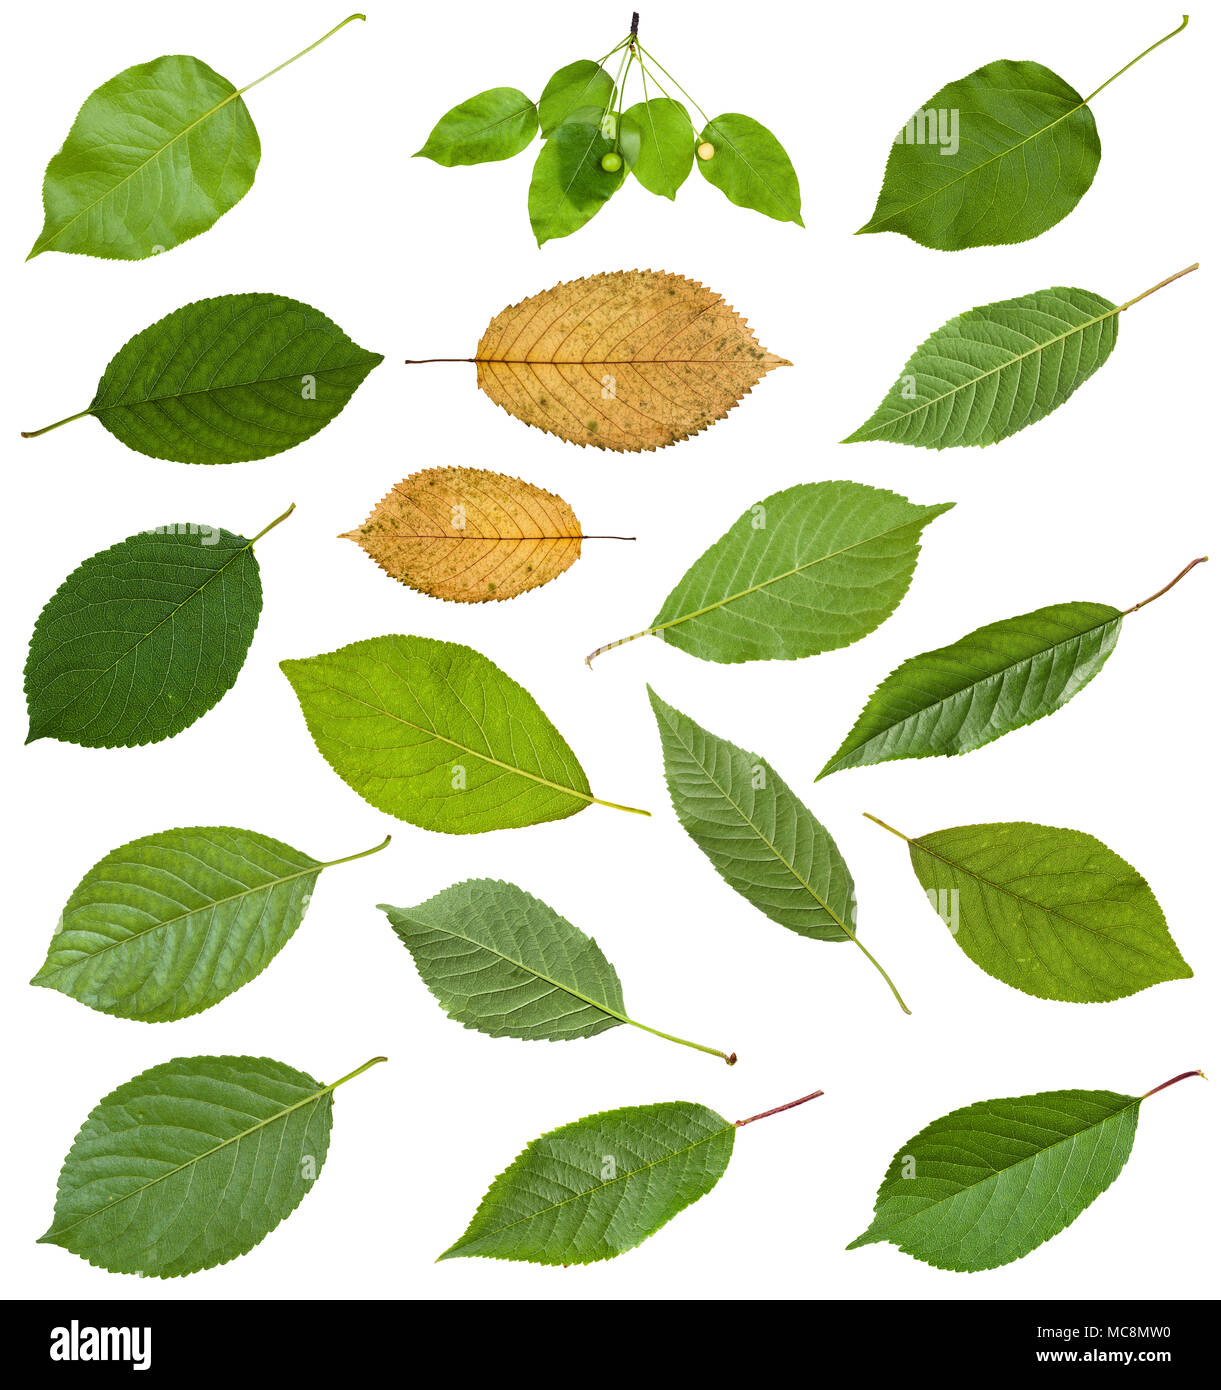 set of various leaves of prunus trees isolated on white background Stock Photo